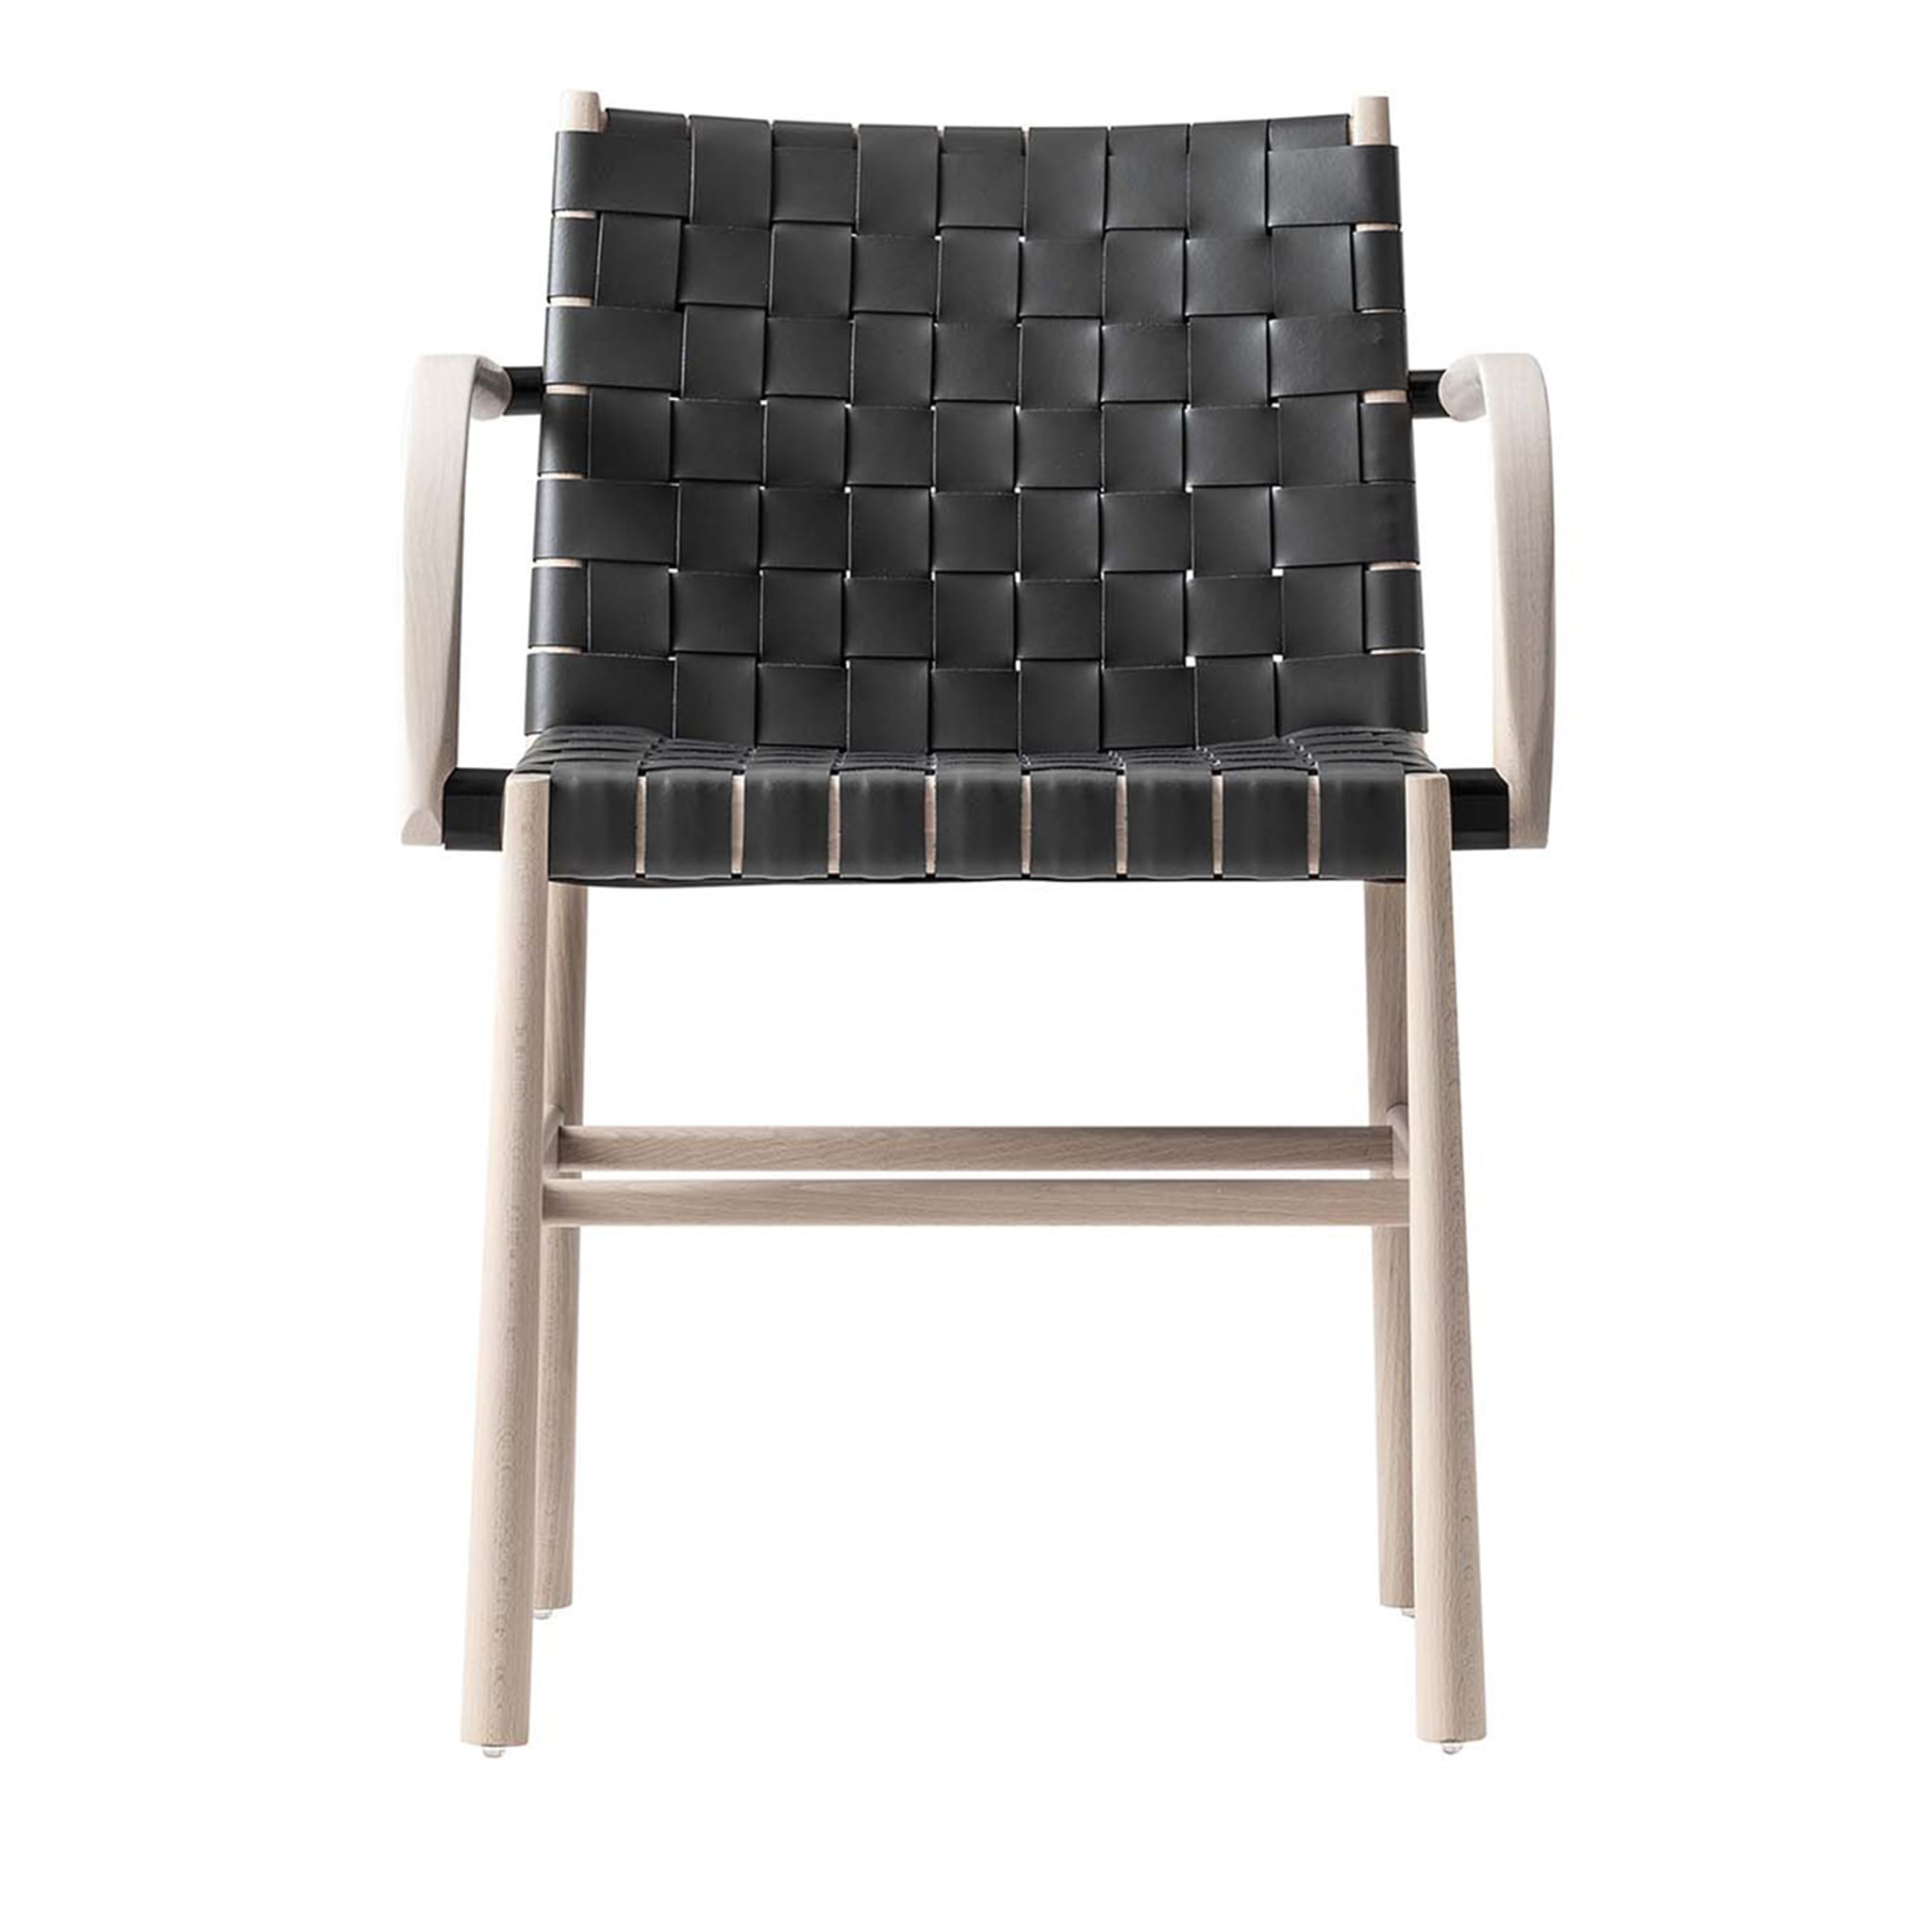 Julie White and Black chair with armrests by Emilio Nanni - Main view